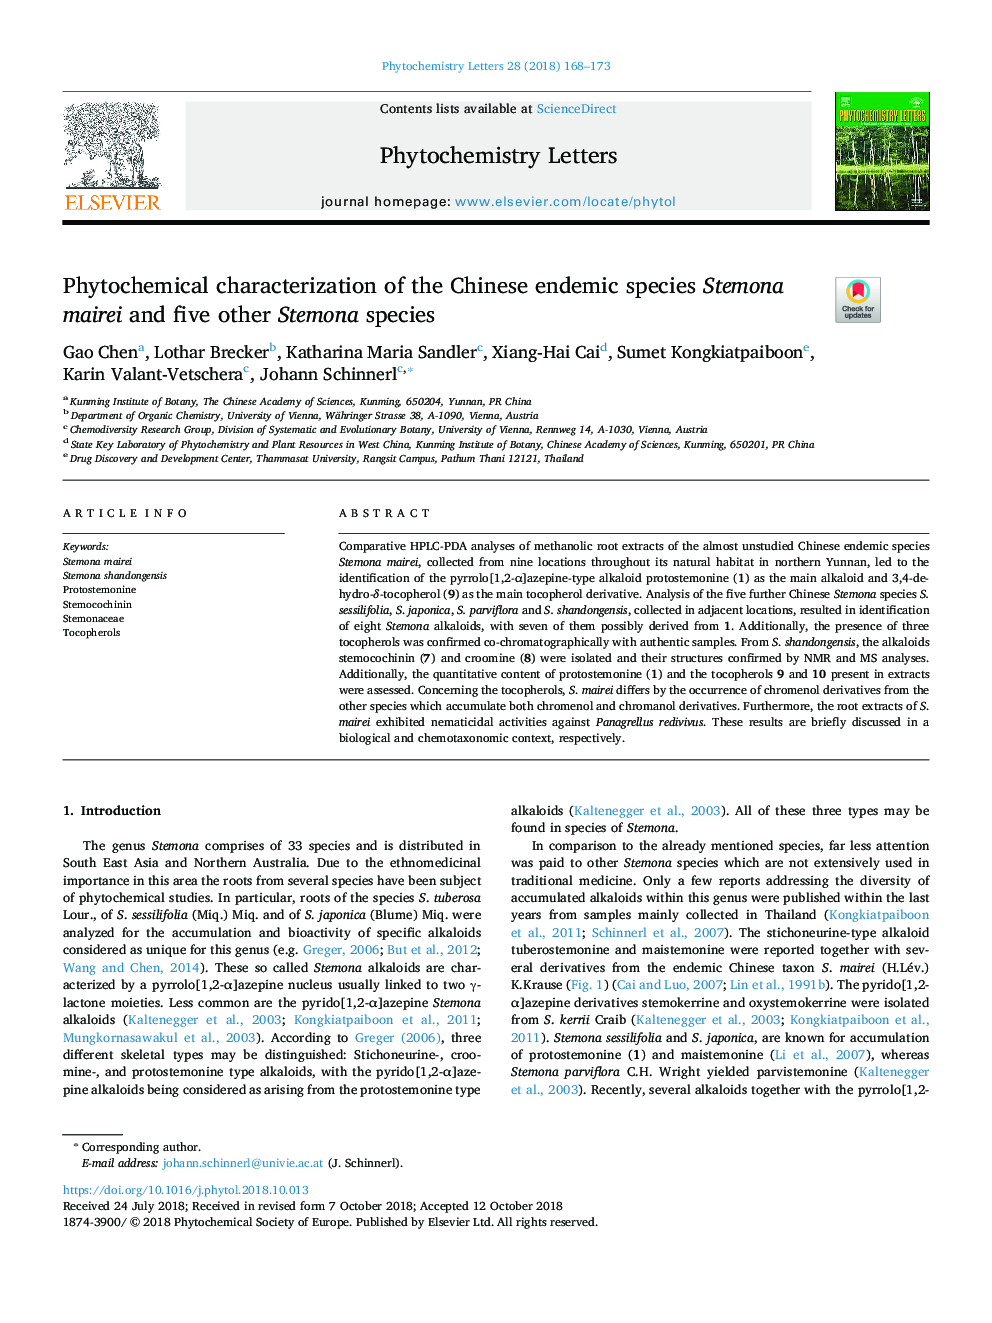 Phytochemical characterization of the Chinese endemic species Stemona mairei and five other Stemona species